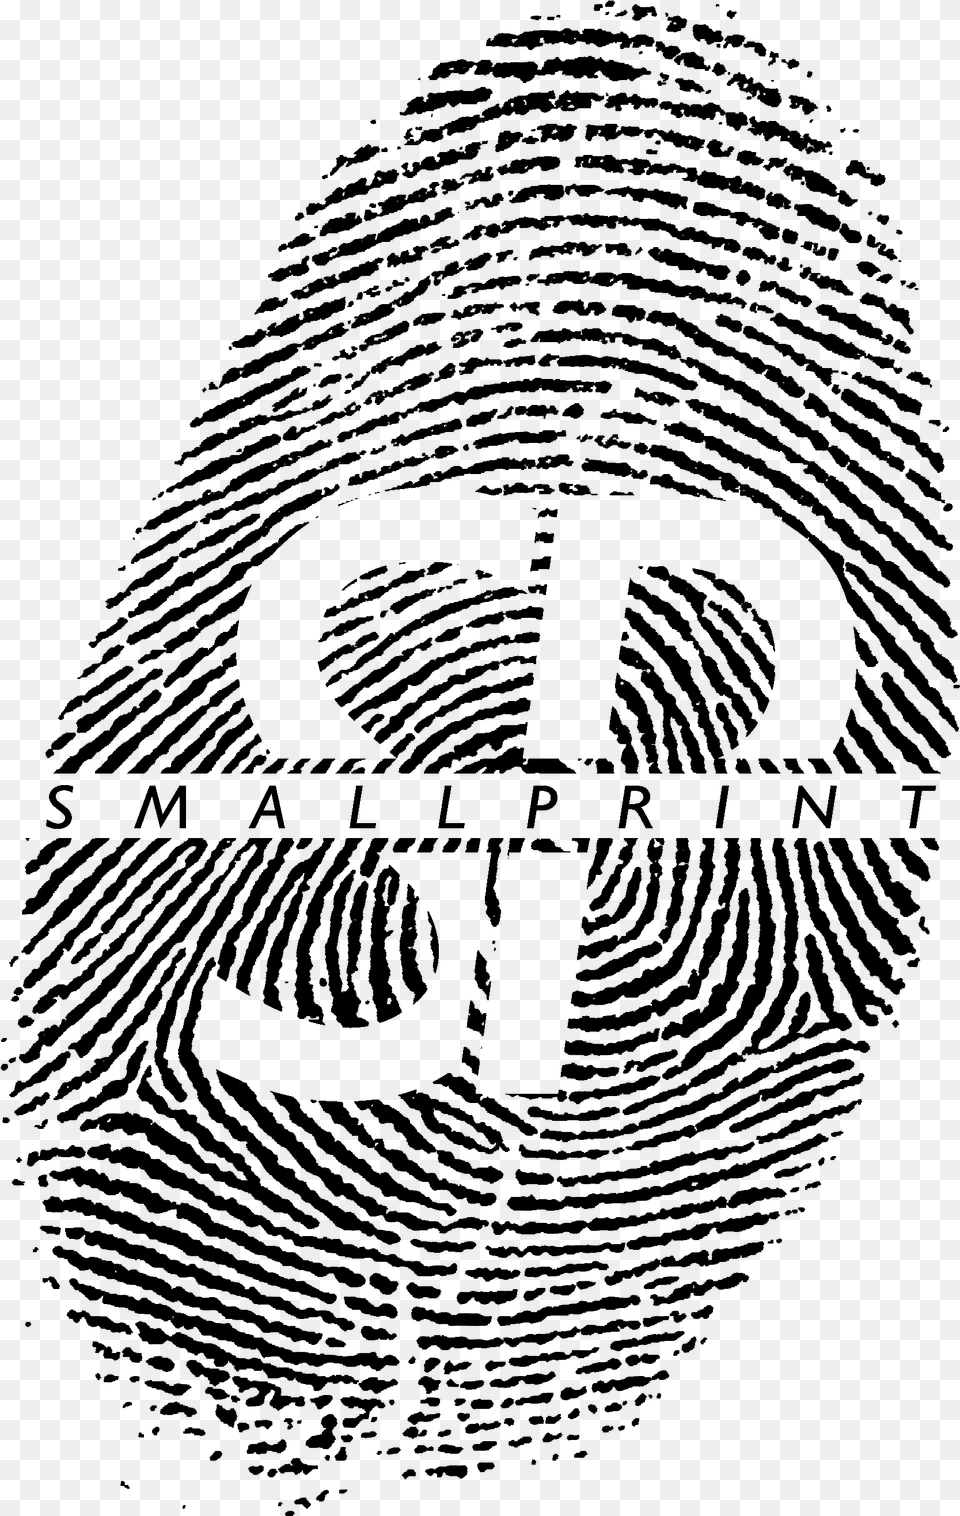 Smallprint Recordings Smallprint Recordings Fibonacci Sequence In Fingerprint, Gray Png Image